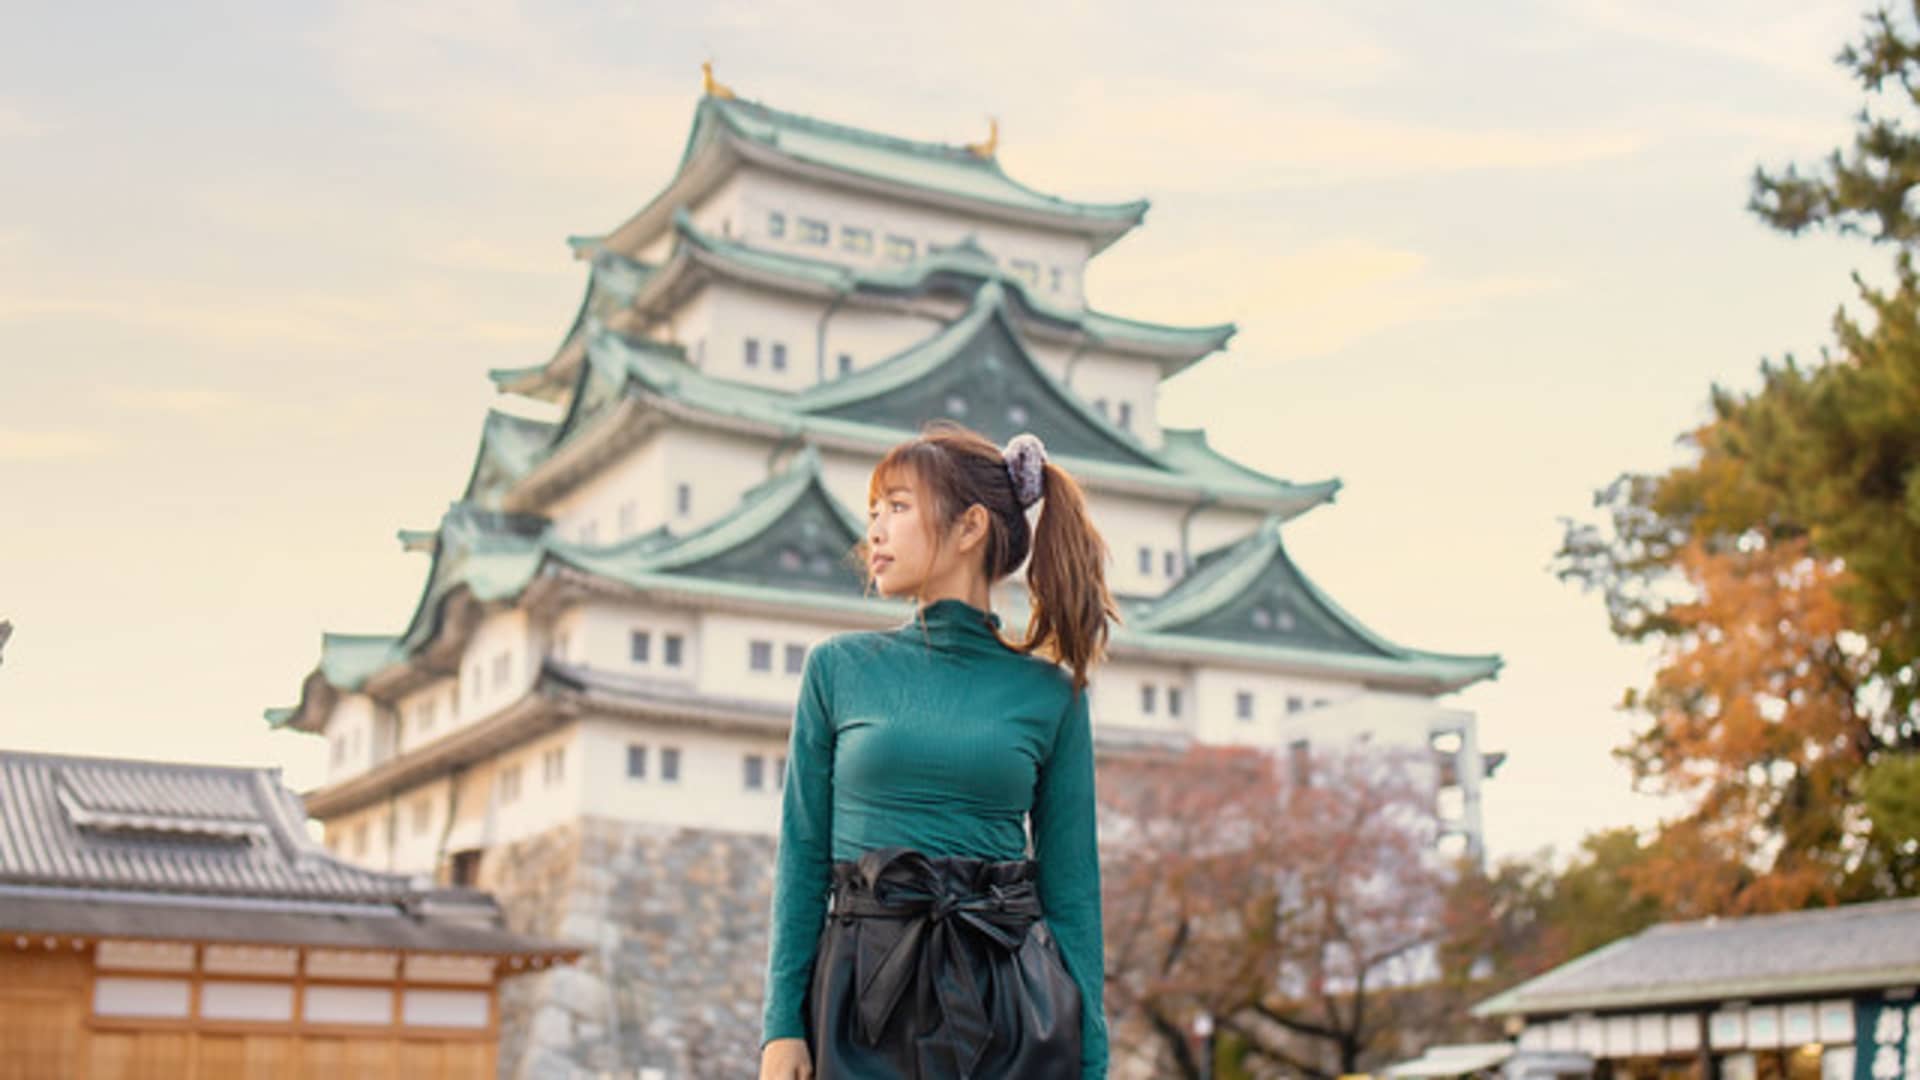 She traveled to Japan more than 50 times. Here are 3 life habits she learned from the country